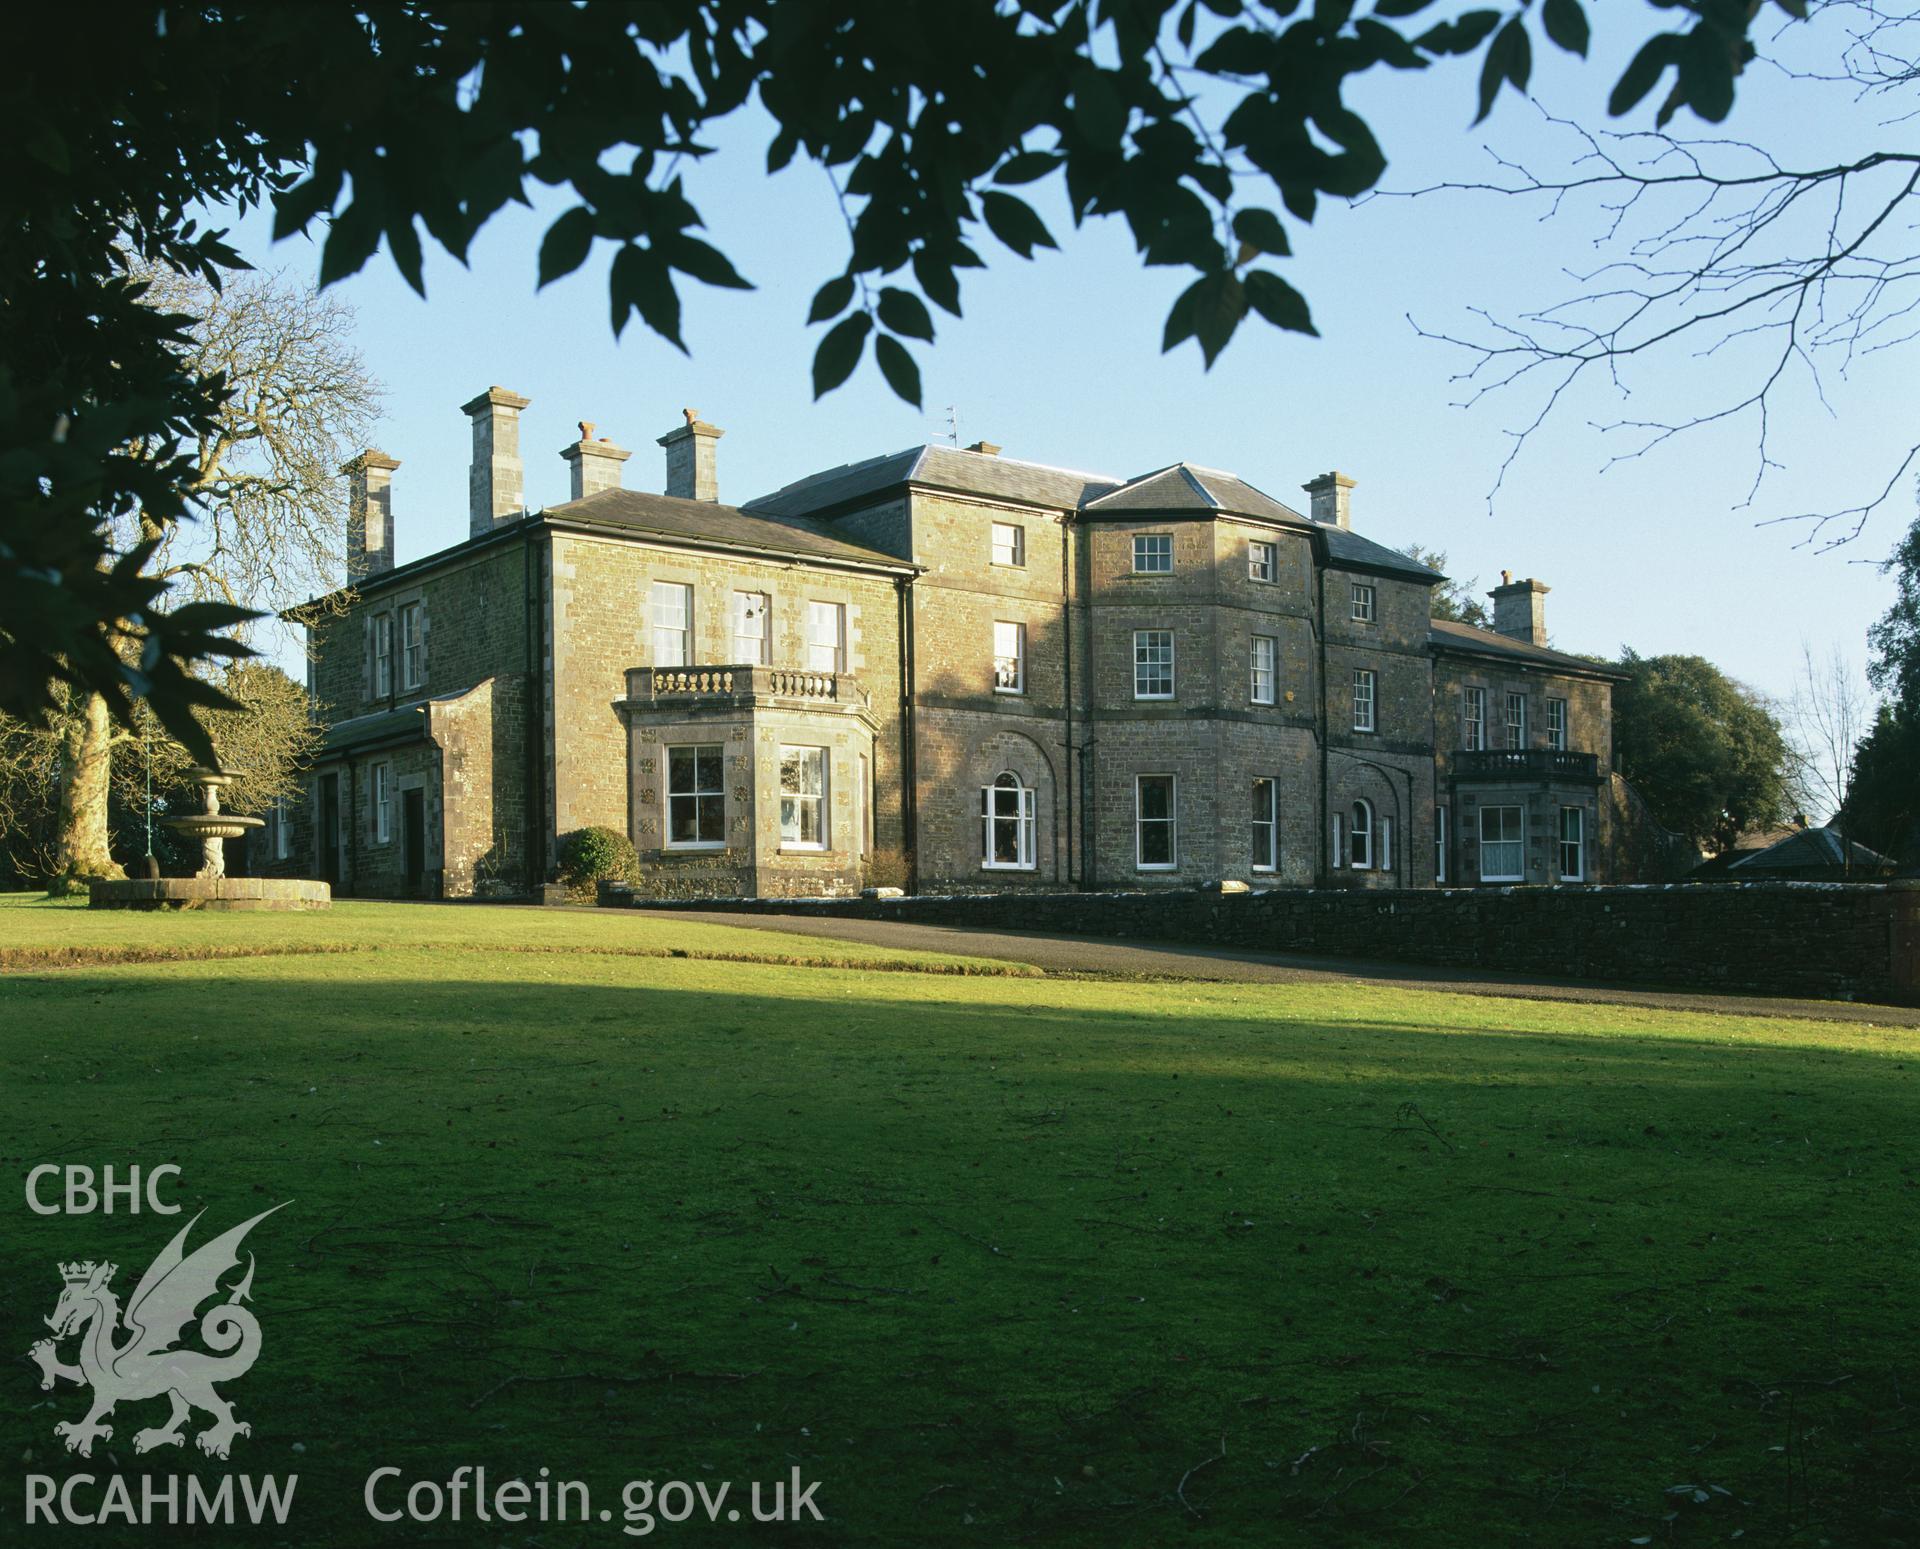 RCAHMW colour transparency showing exterior view of Cresselly House, taken by Iain Wright, 2003